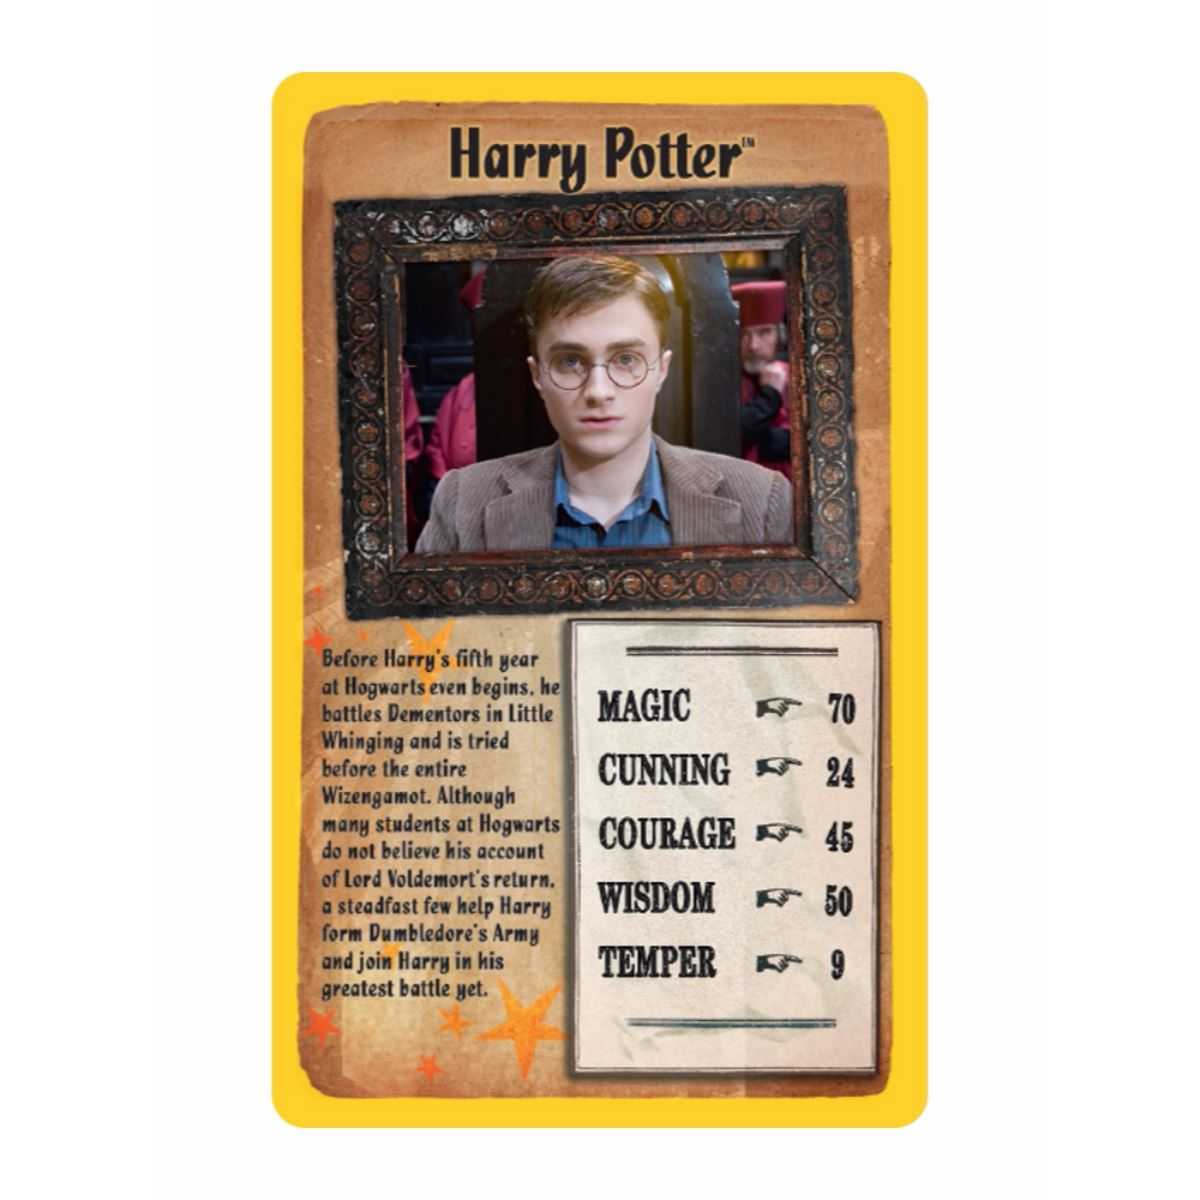 Top Trumps Card Intended For Top Trump Card Template